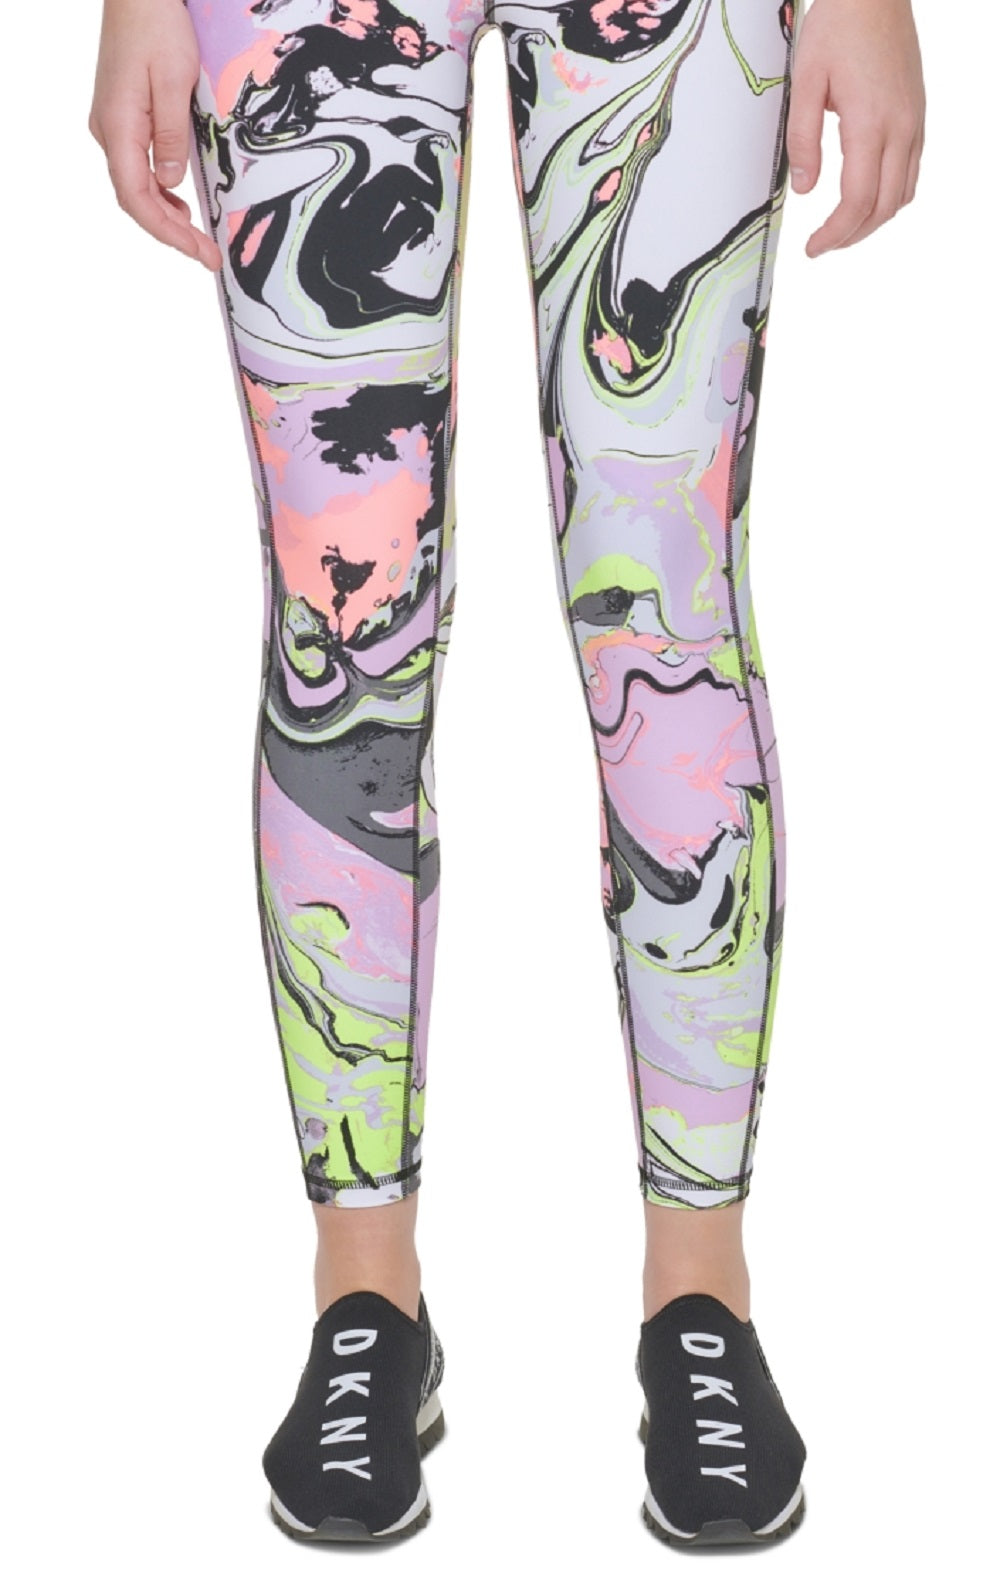 DKNY Women's Printed High Waist 7/8 Leggings Pink Size Large – Steals